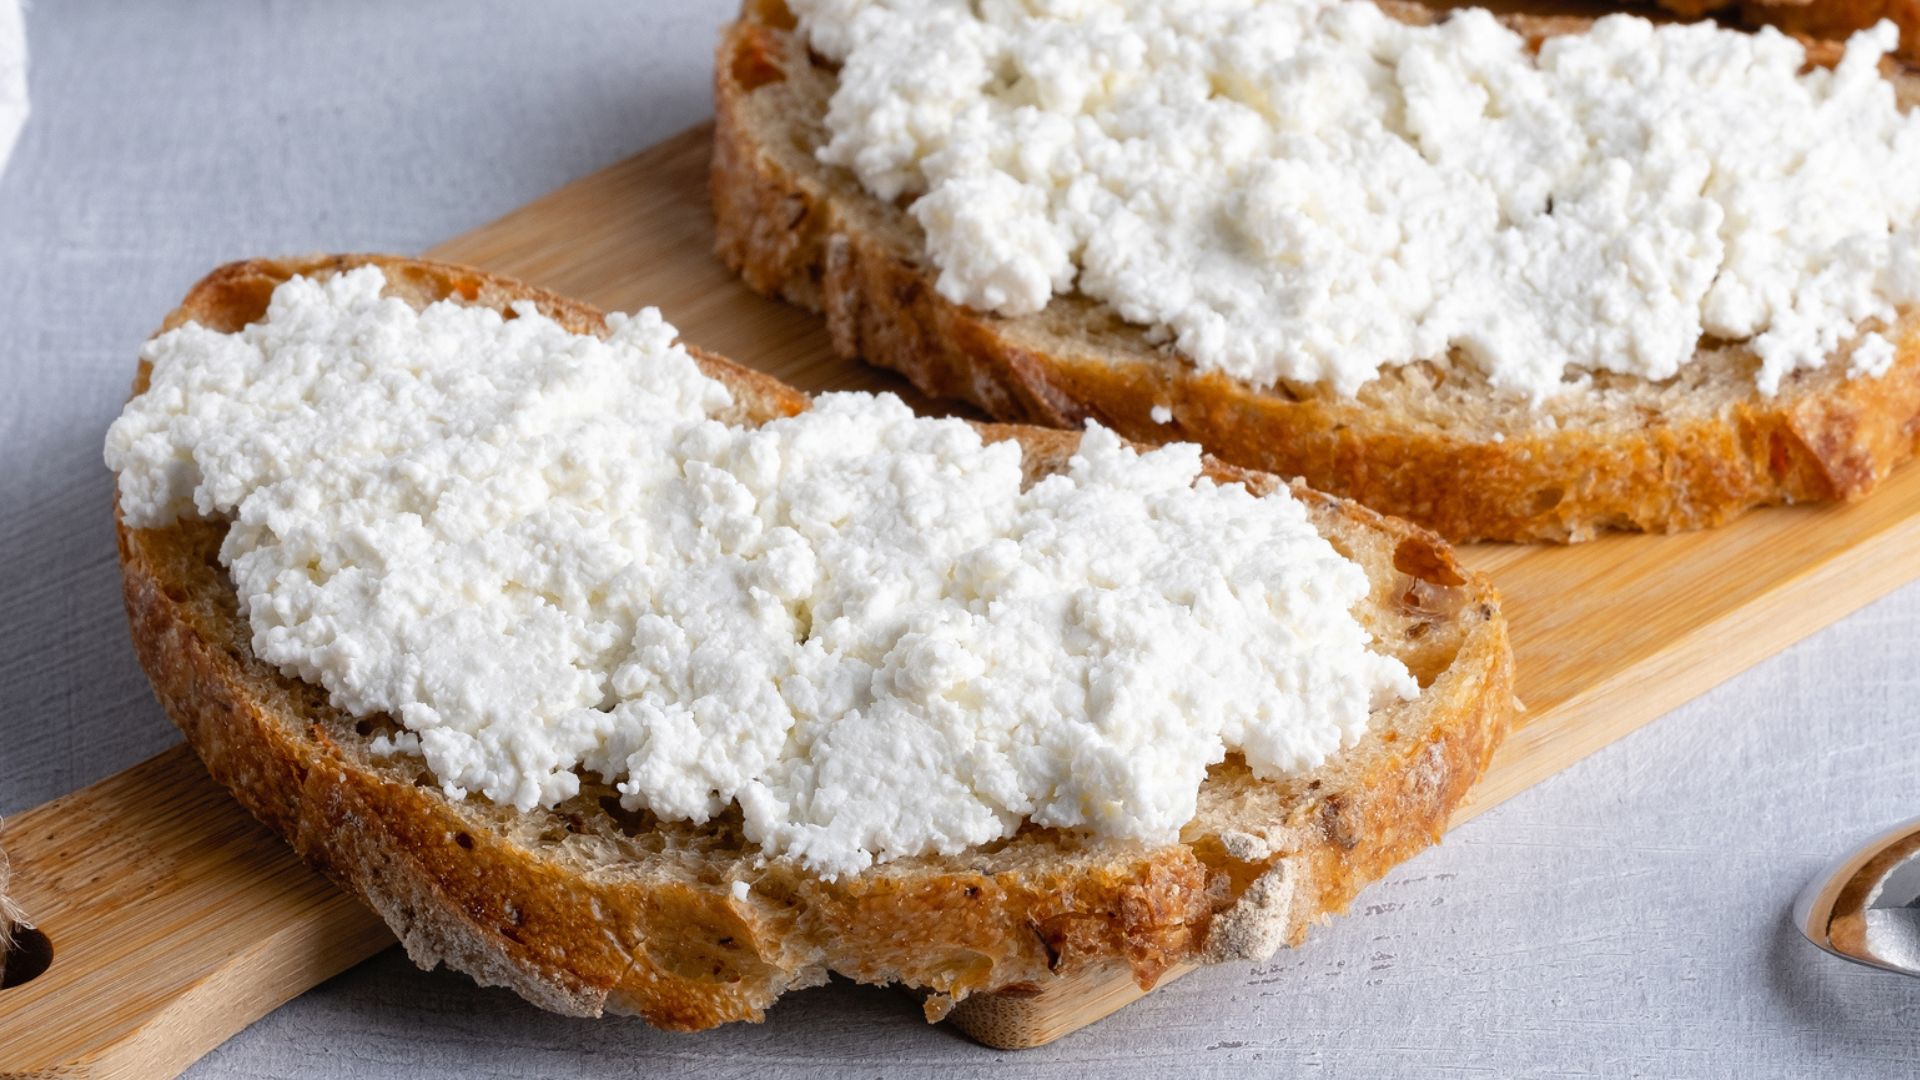 Cottage cheese on wholewheat seeded toast